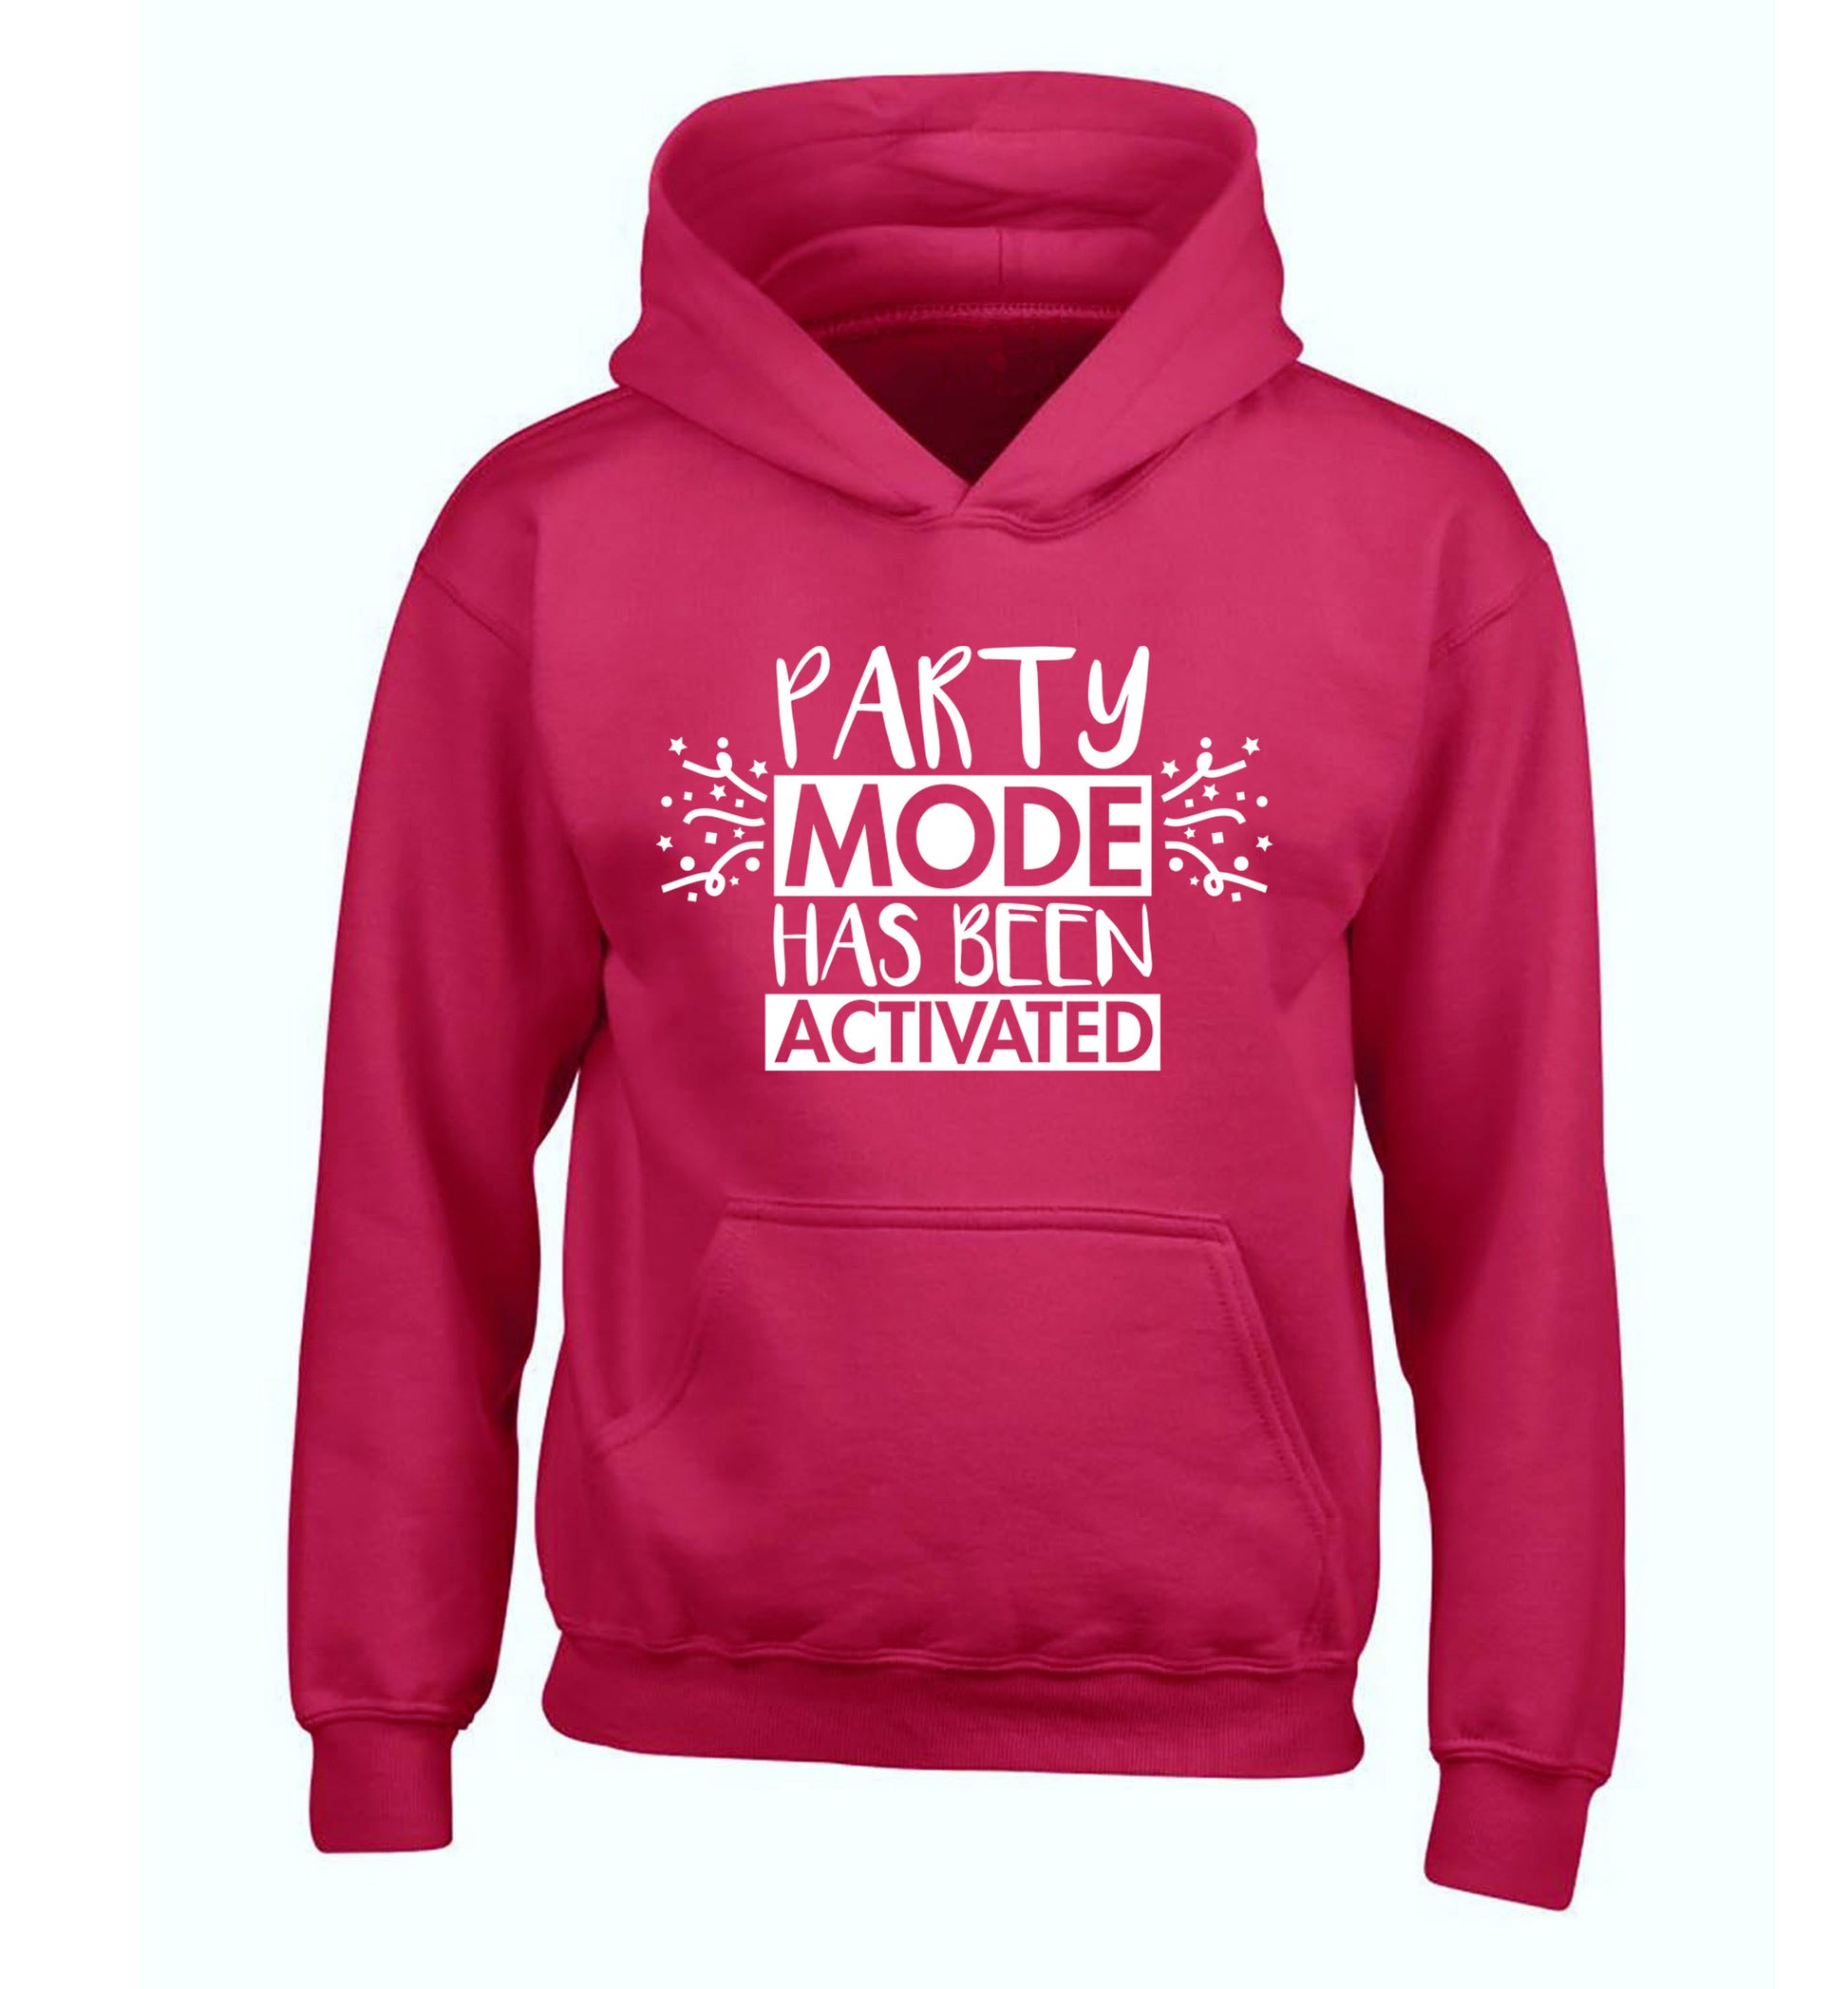 Please do not disturb party mode has been activated children's pink hoodie 12-14 Years